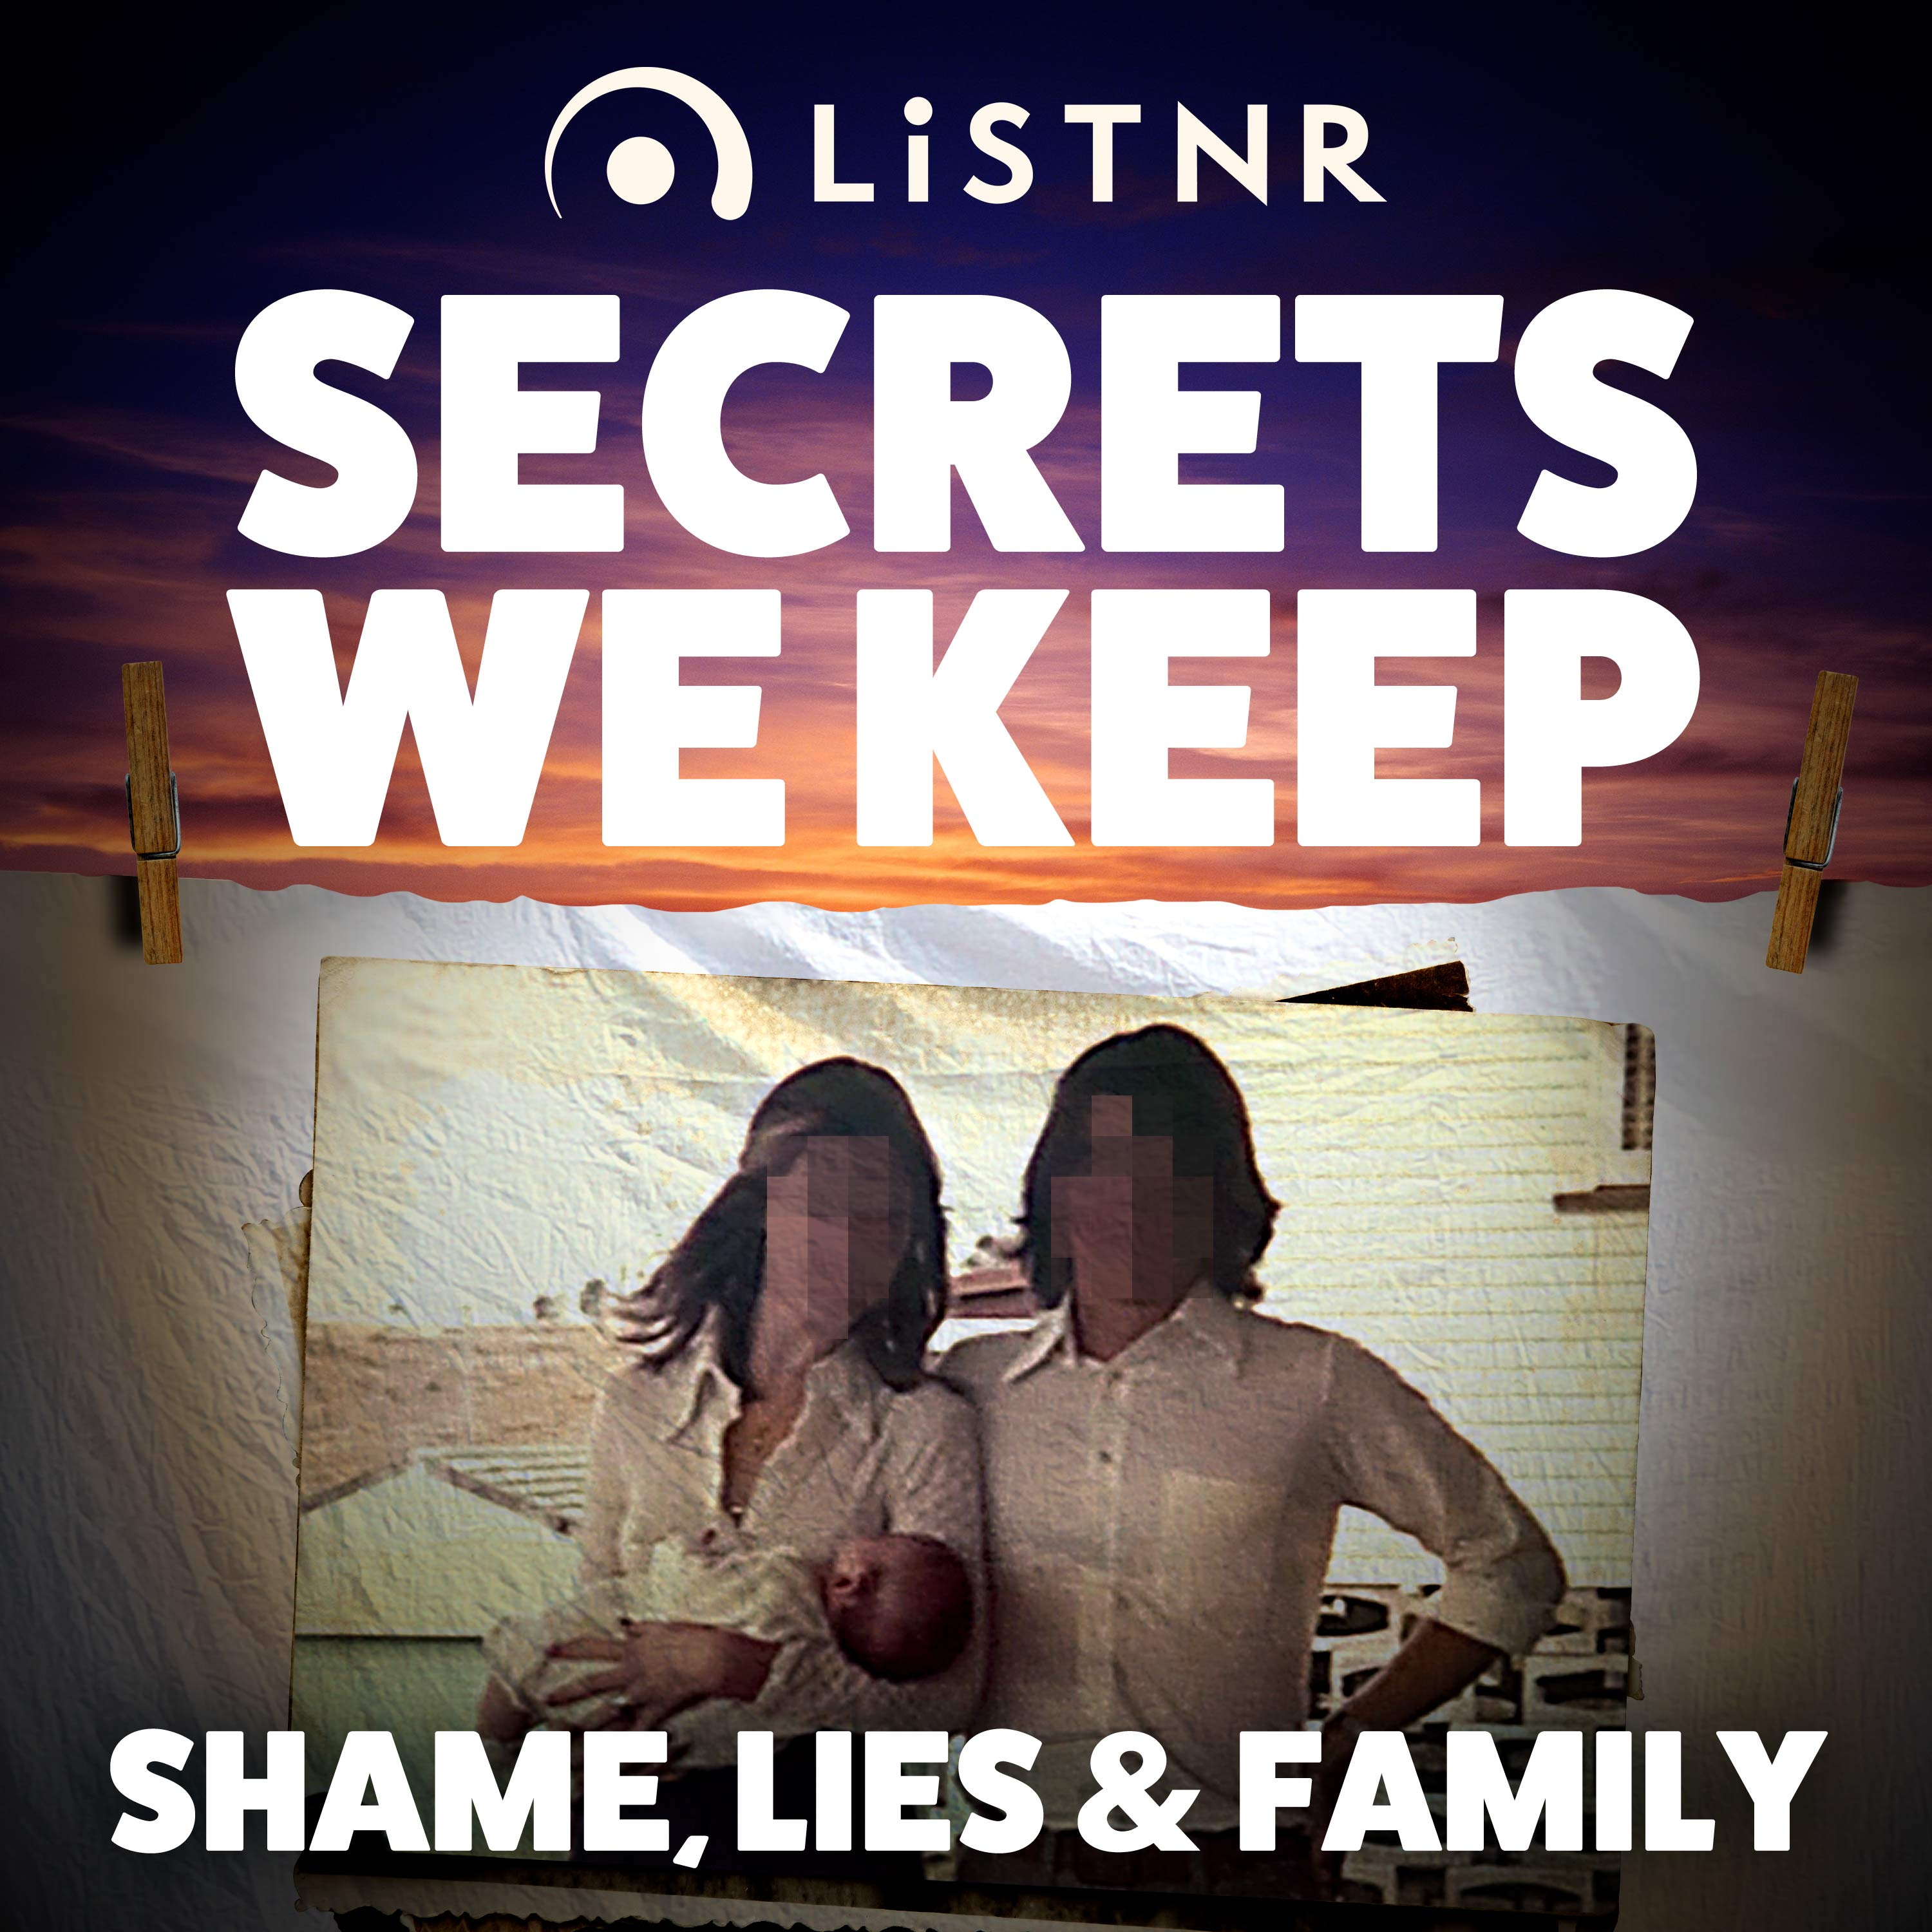 Shame, Lies & Family - The wake cover image